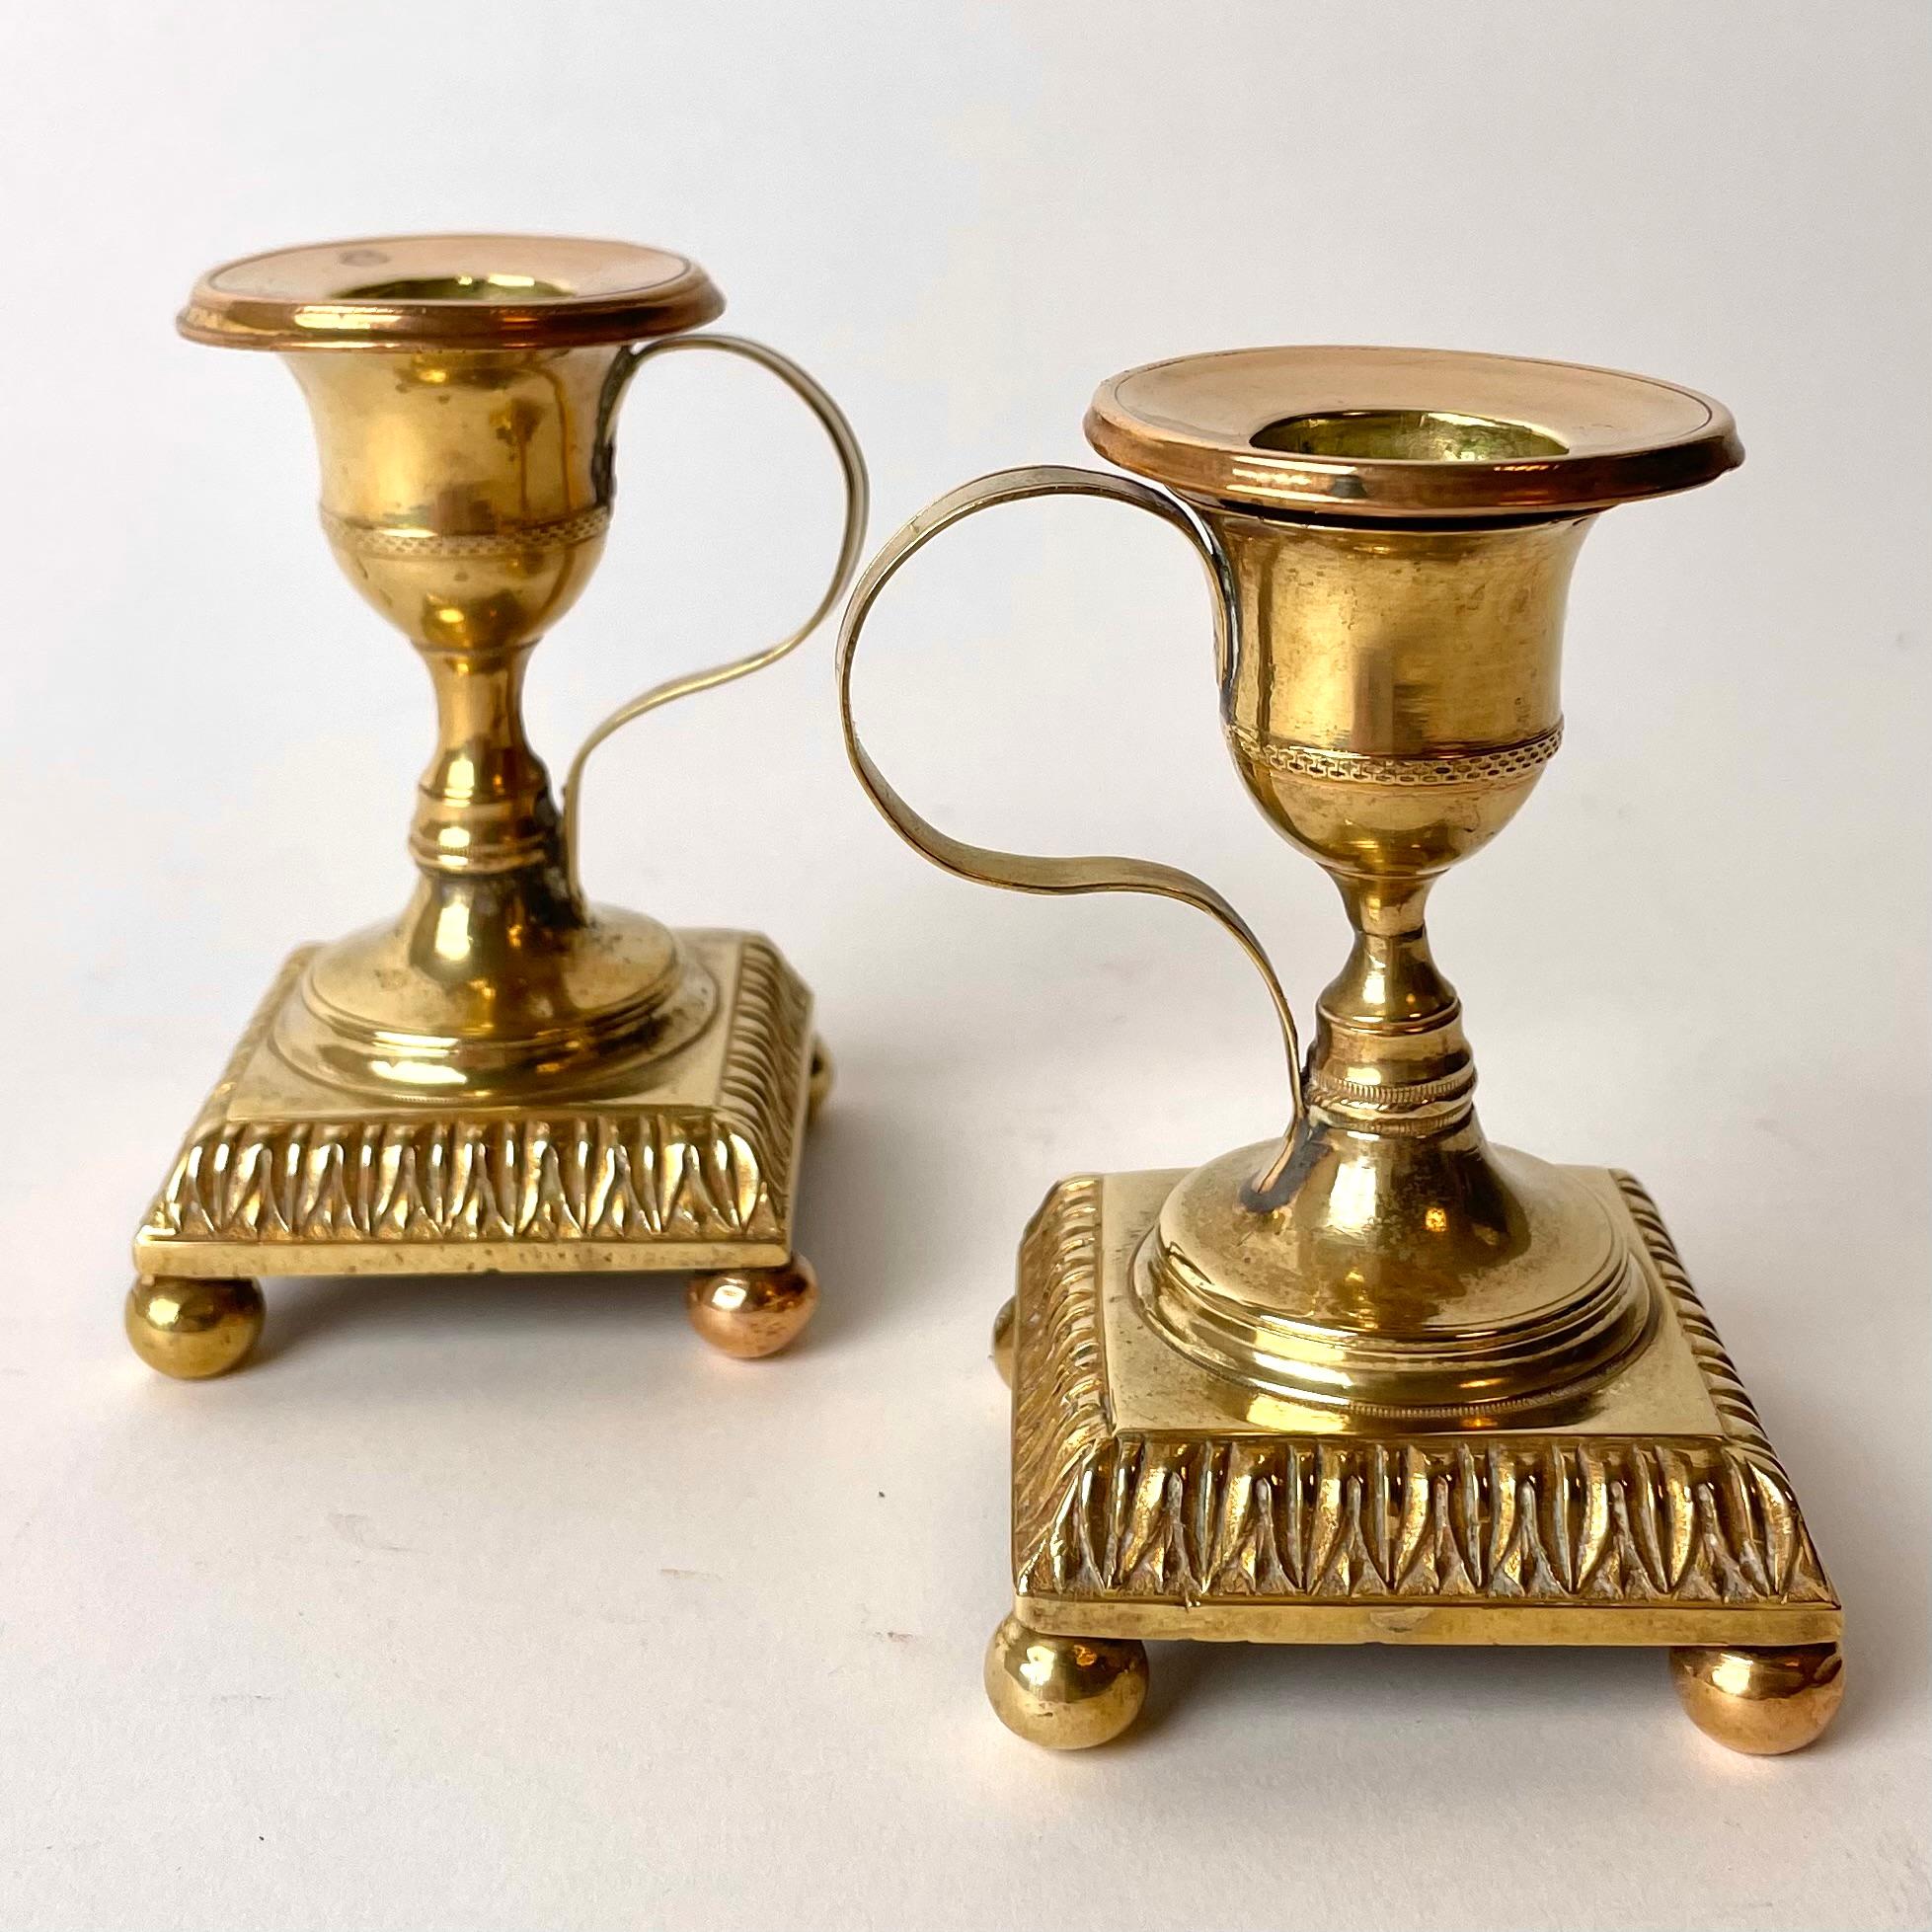 Small Pair of Gustavian Night Candlesticks from the, Late 18th Century In Good Condition For Sale In Knivsta, SE